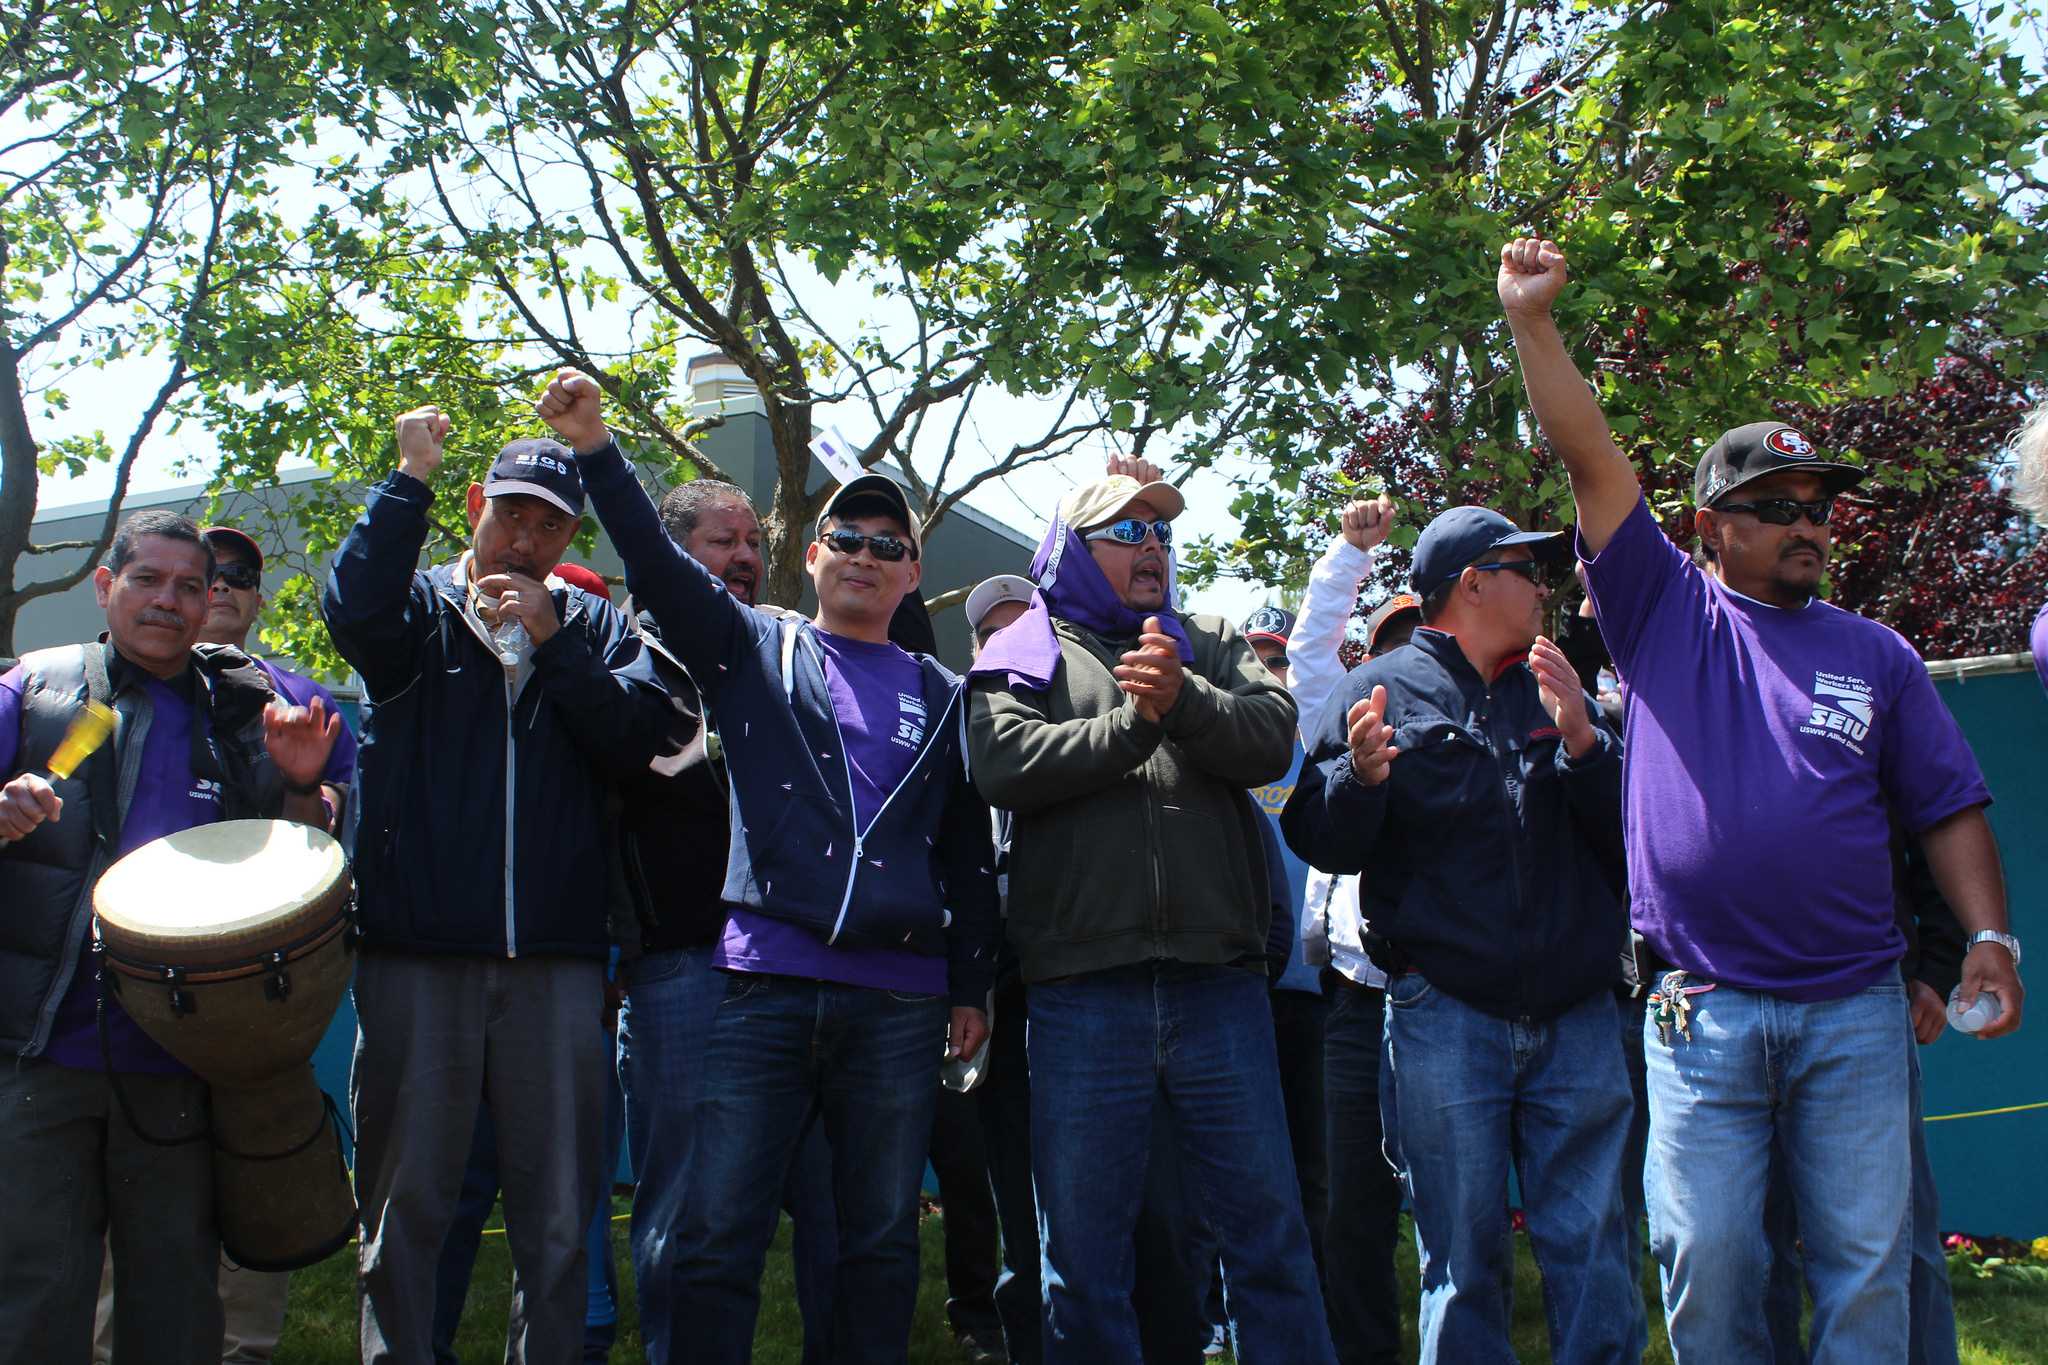 Former Park Merced janitors and handymen who have been terminated two weeks prior rally in front of the Park Merced leasing office Thursday, April 23. (Angeline Ubaldo / Xpress)